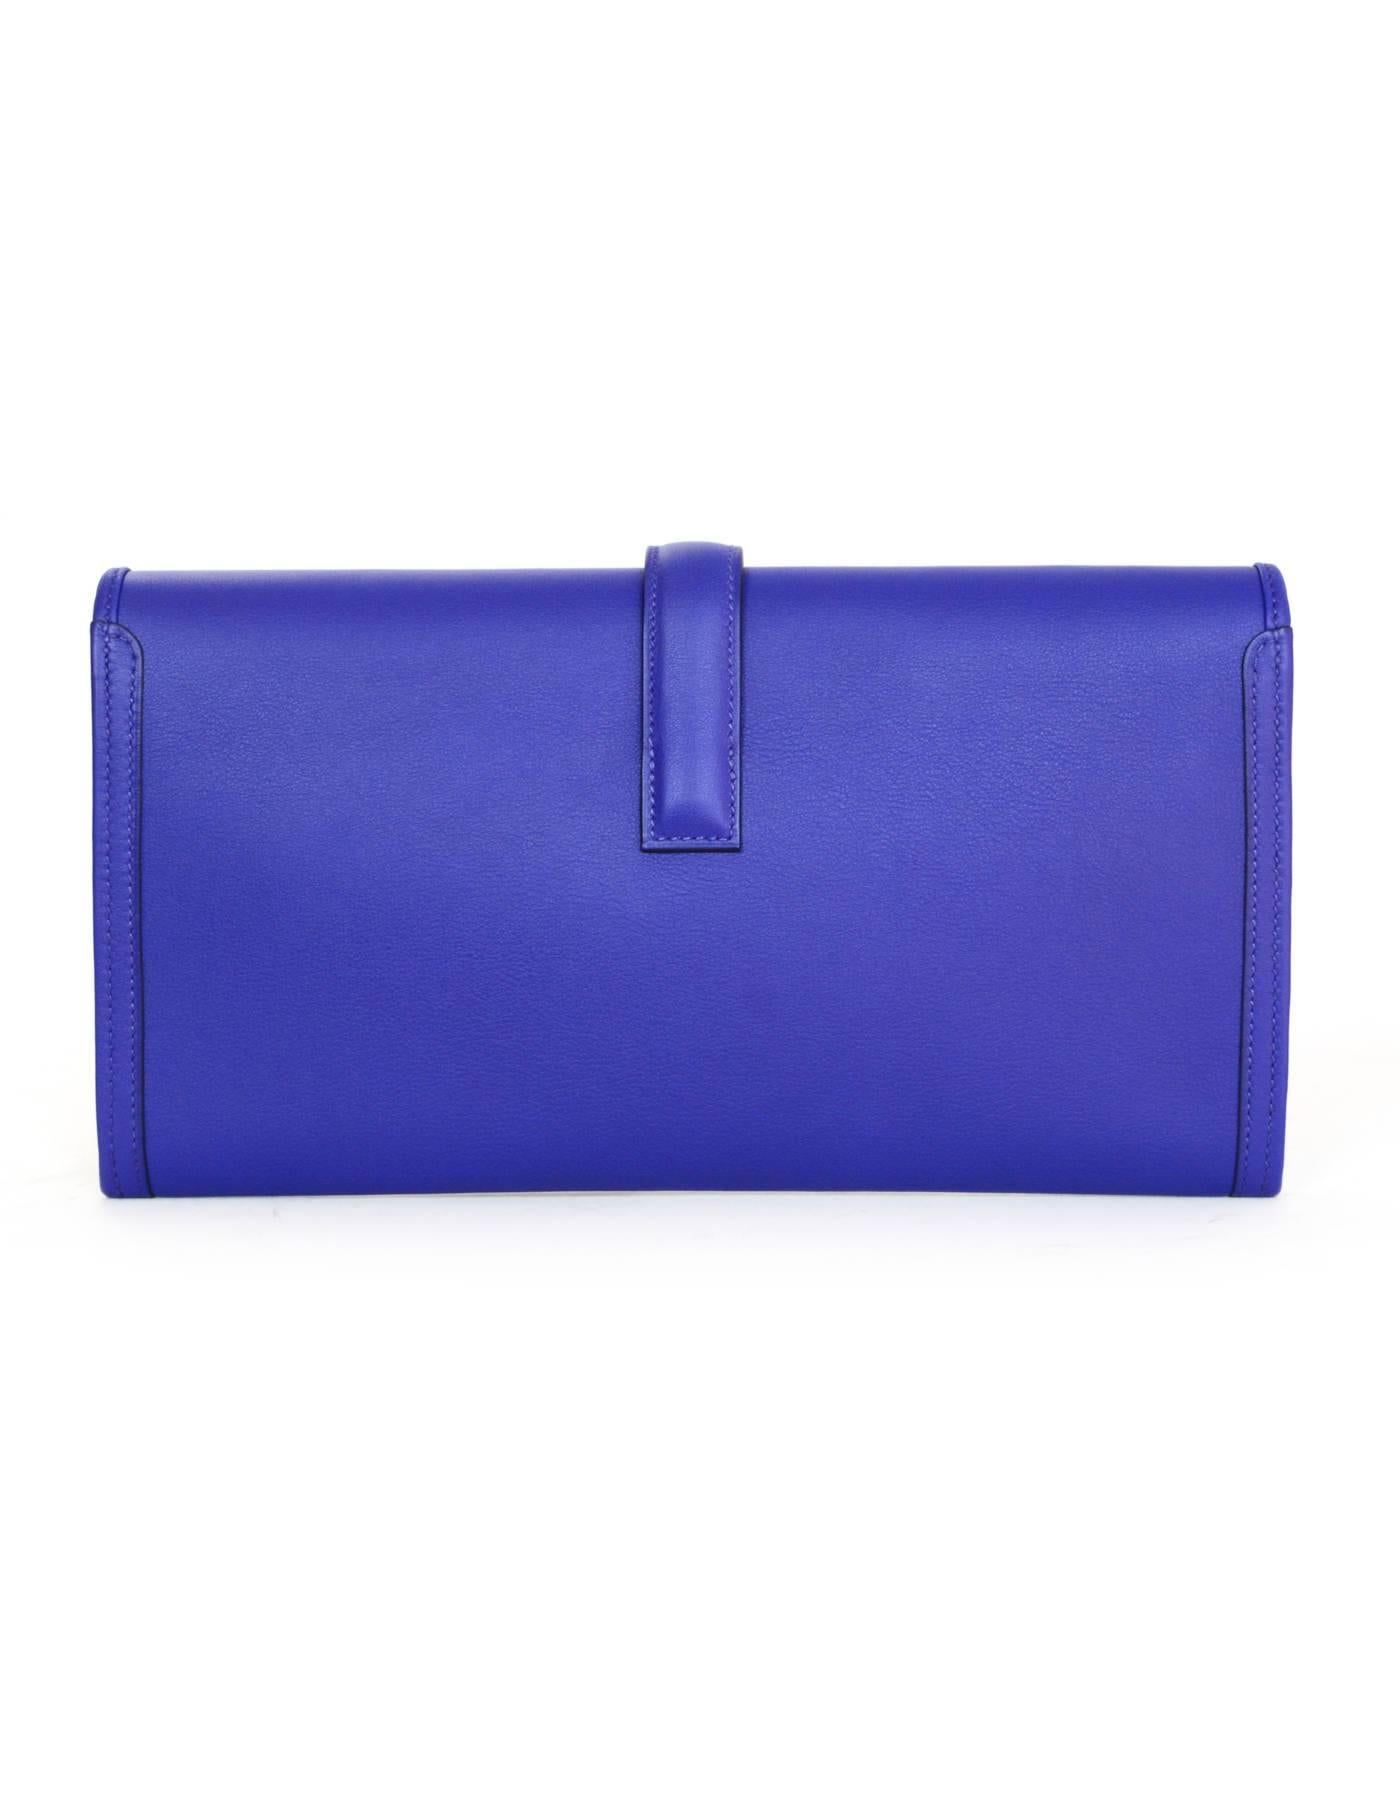 Hermes 2017 Blue Bleu Electrique Swift Leather Jige Elan 29 H Clutch Bag In Excellent Condition In New York, NY